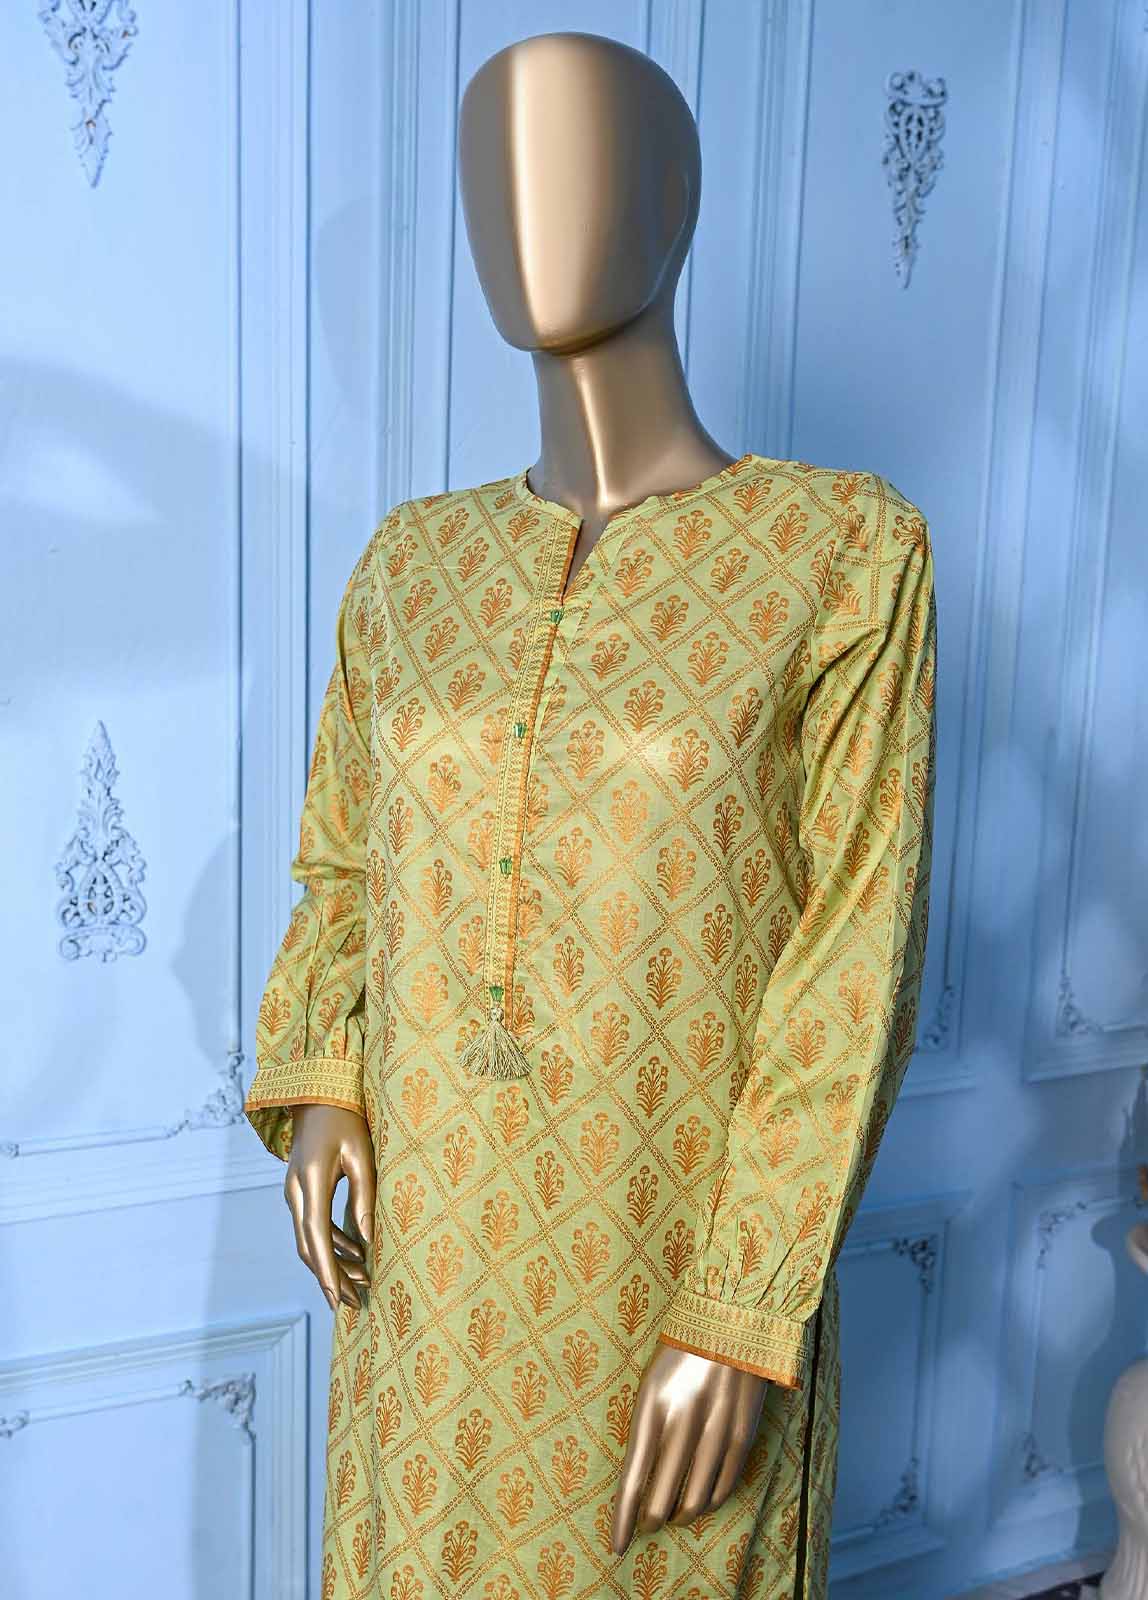 LRGF-003- 2 Piece Gold Printed Stitched